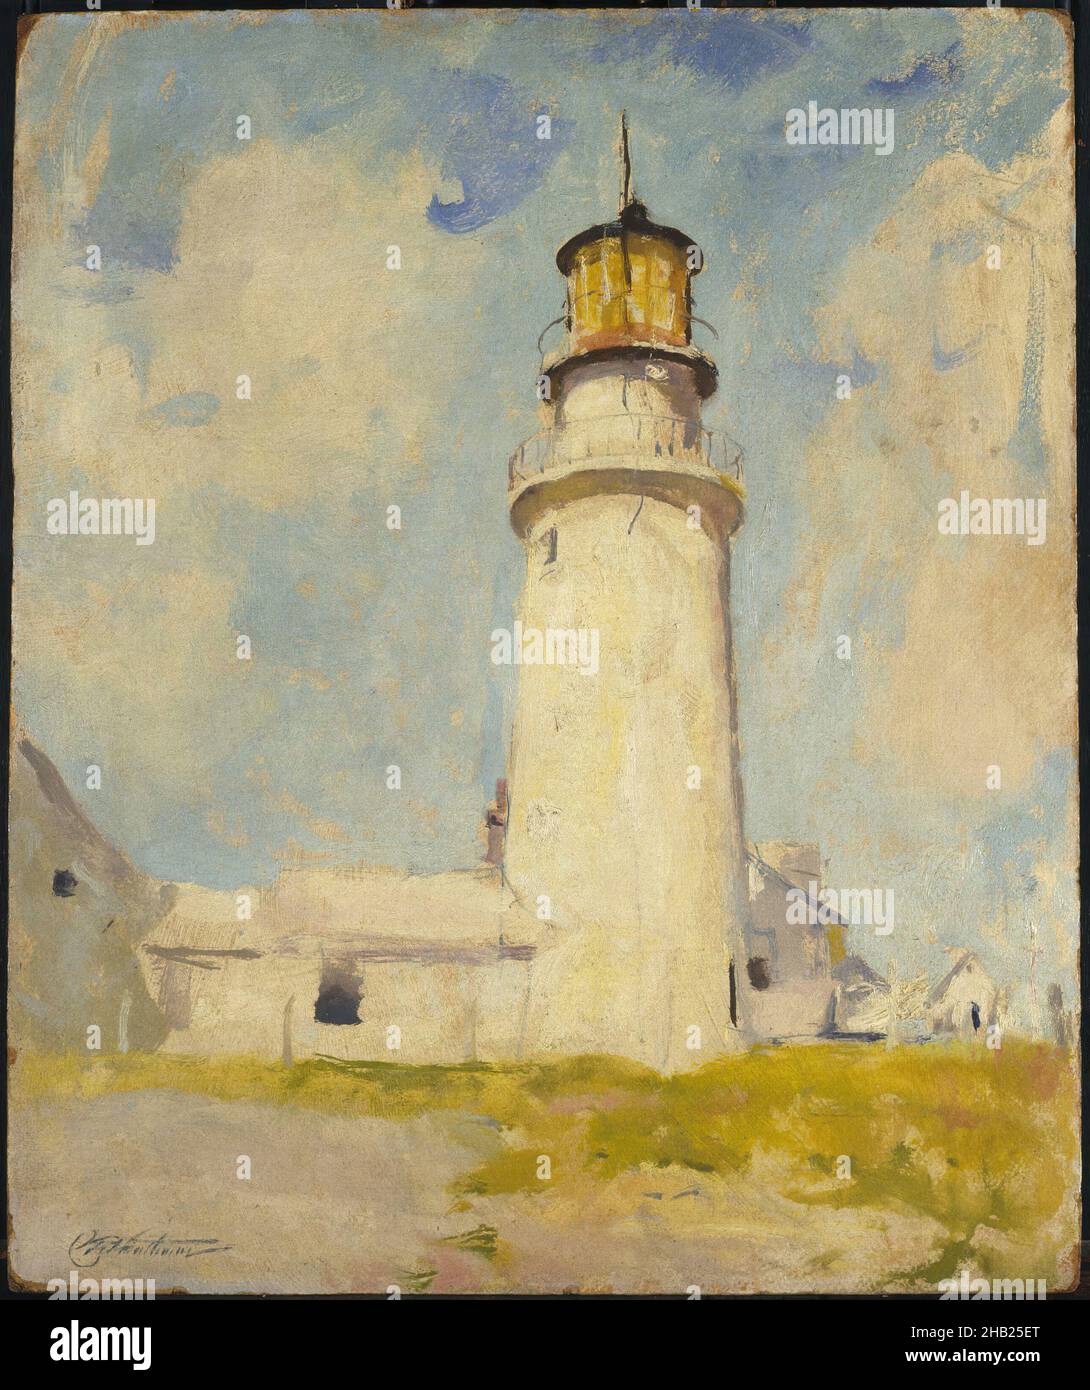 Highland Light, Charles W. Hawthorne, American, 1872-1930, Oil on panel, ca. 1925, 24 x 19 13/16 in., 60.9 x 50.3 cm, building, ca. 1925, clouds, landscape, lighthouse, ndd7, oil on panel, painting, phallic, sky, sunny Stock Photo